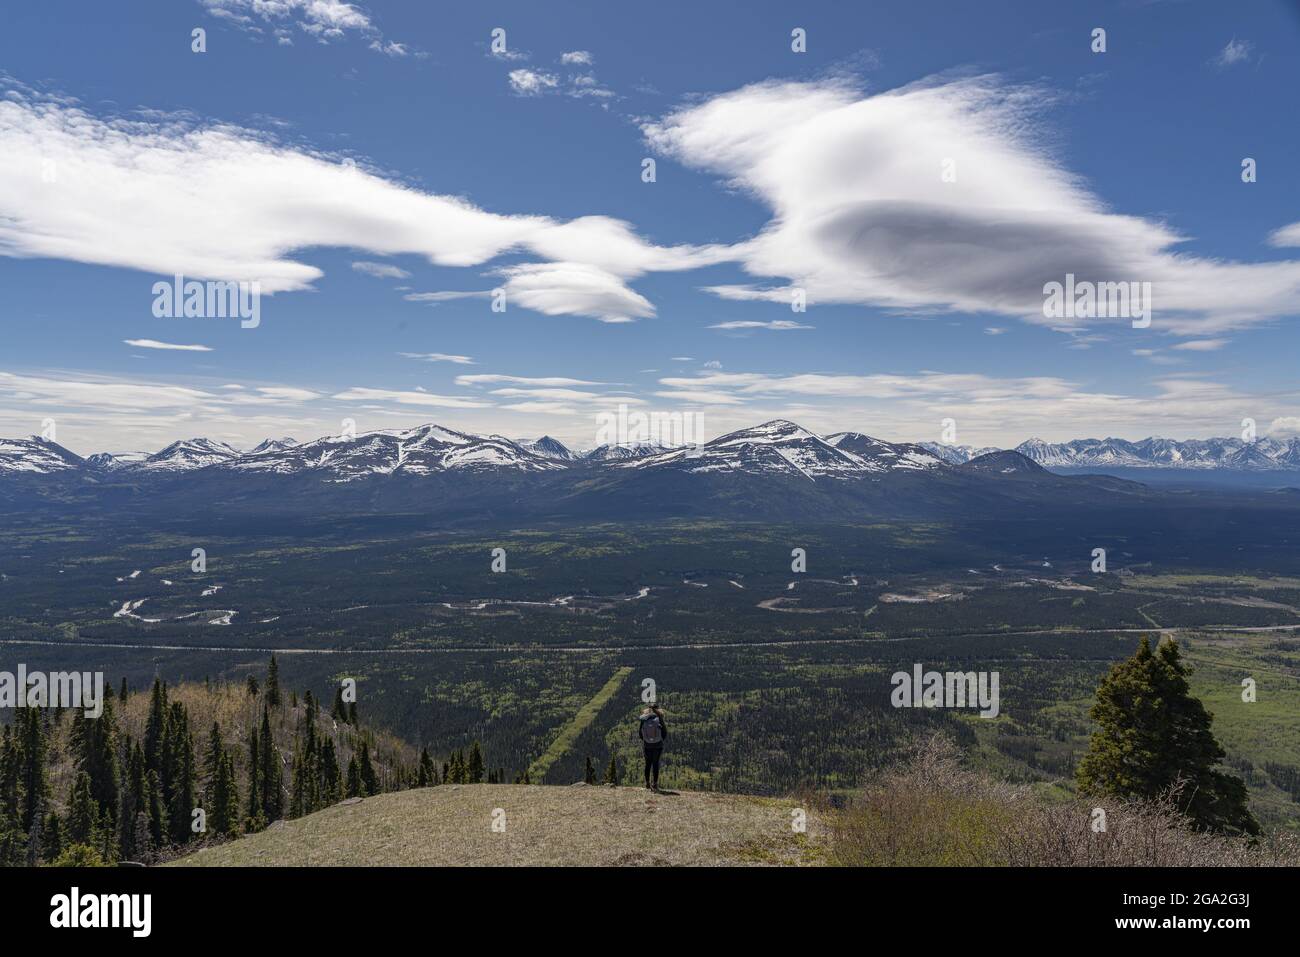 View from behind of a woman standing on mountaintop looking out at the vista of the majestic snowcapped mountain ranges, situated in the Traditiona... Stock Photo